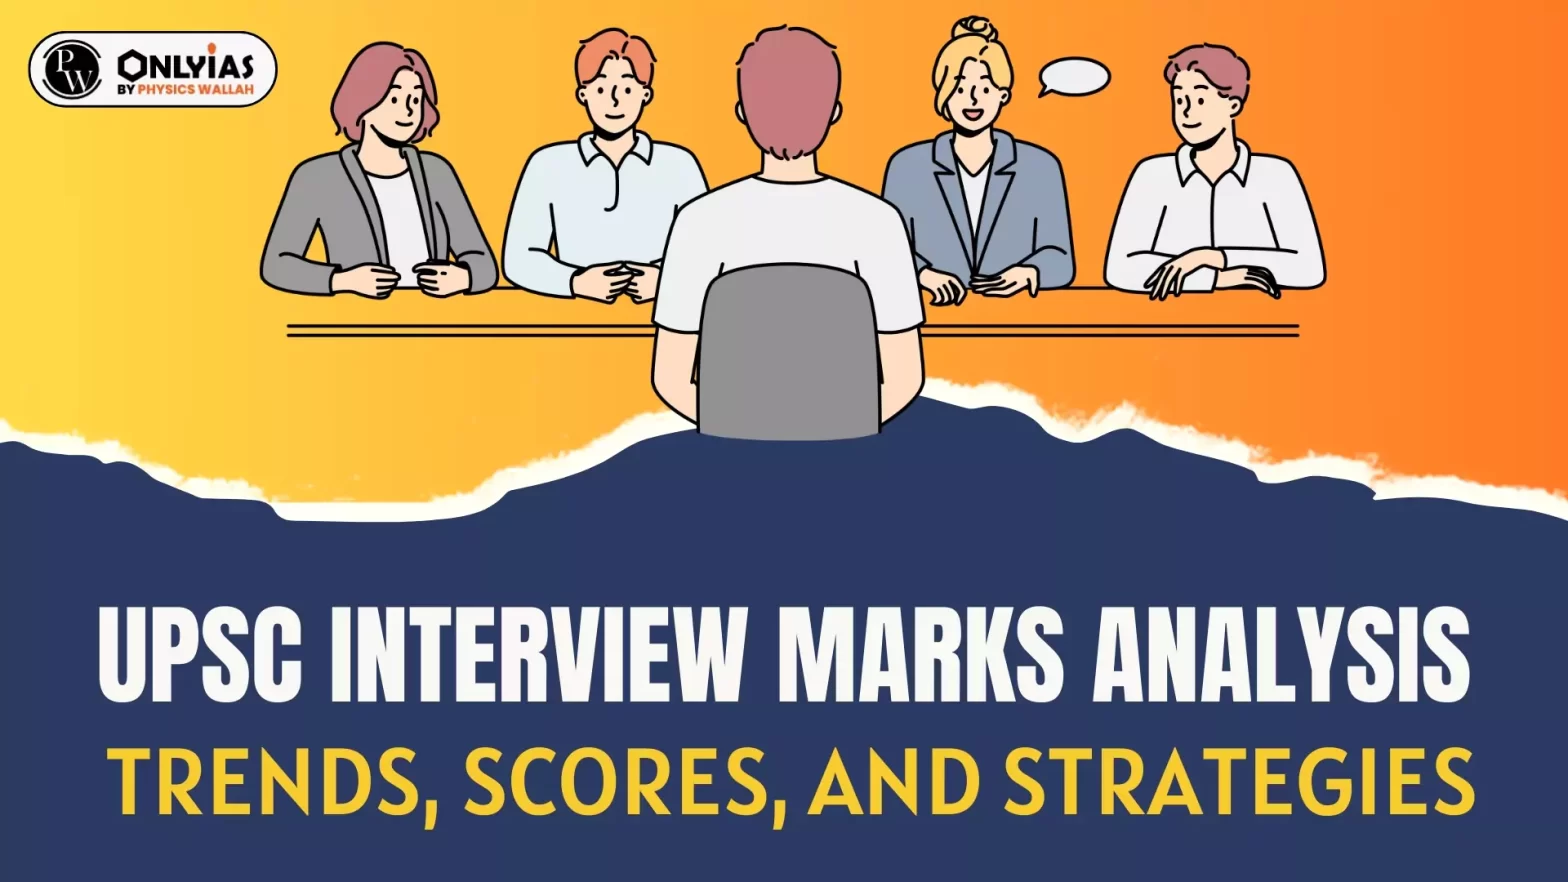 UPSC Interview Marks Analysis: Trends, Scores, and Strategies